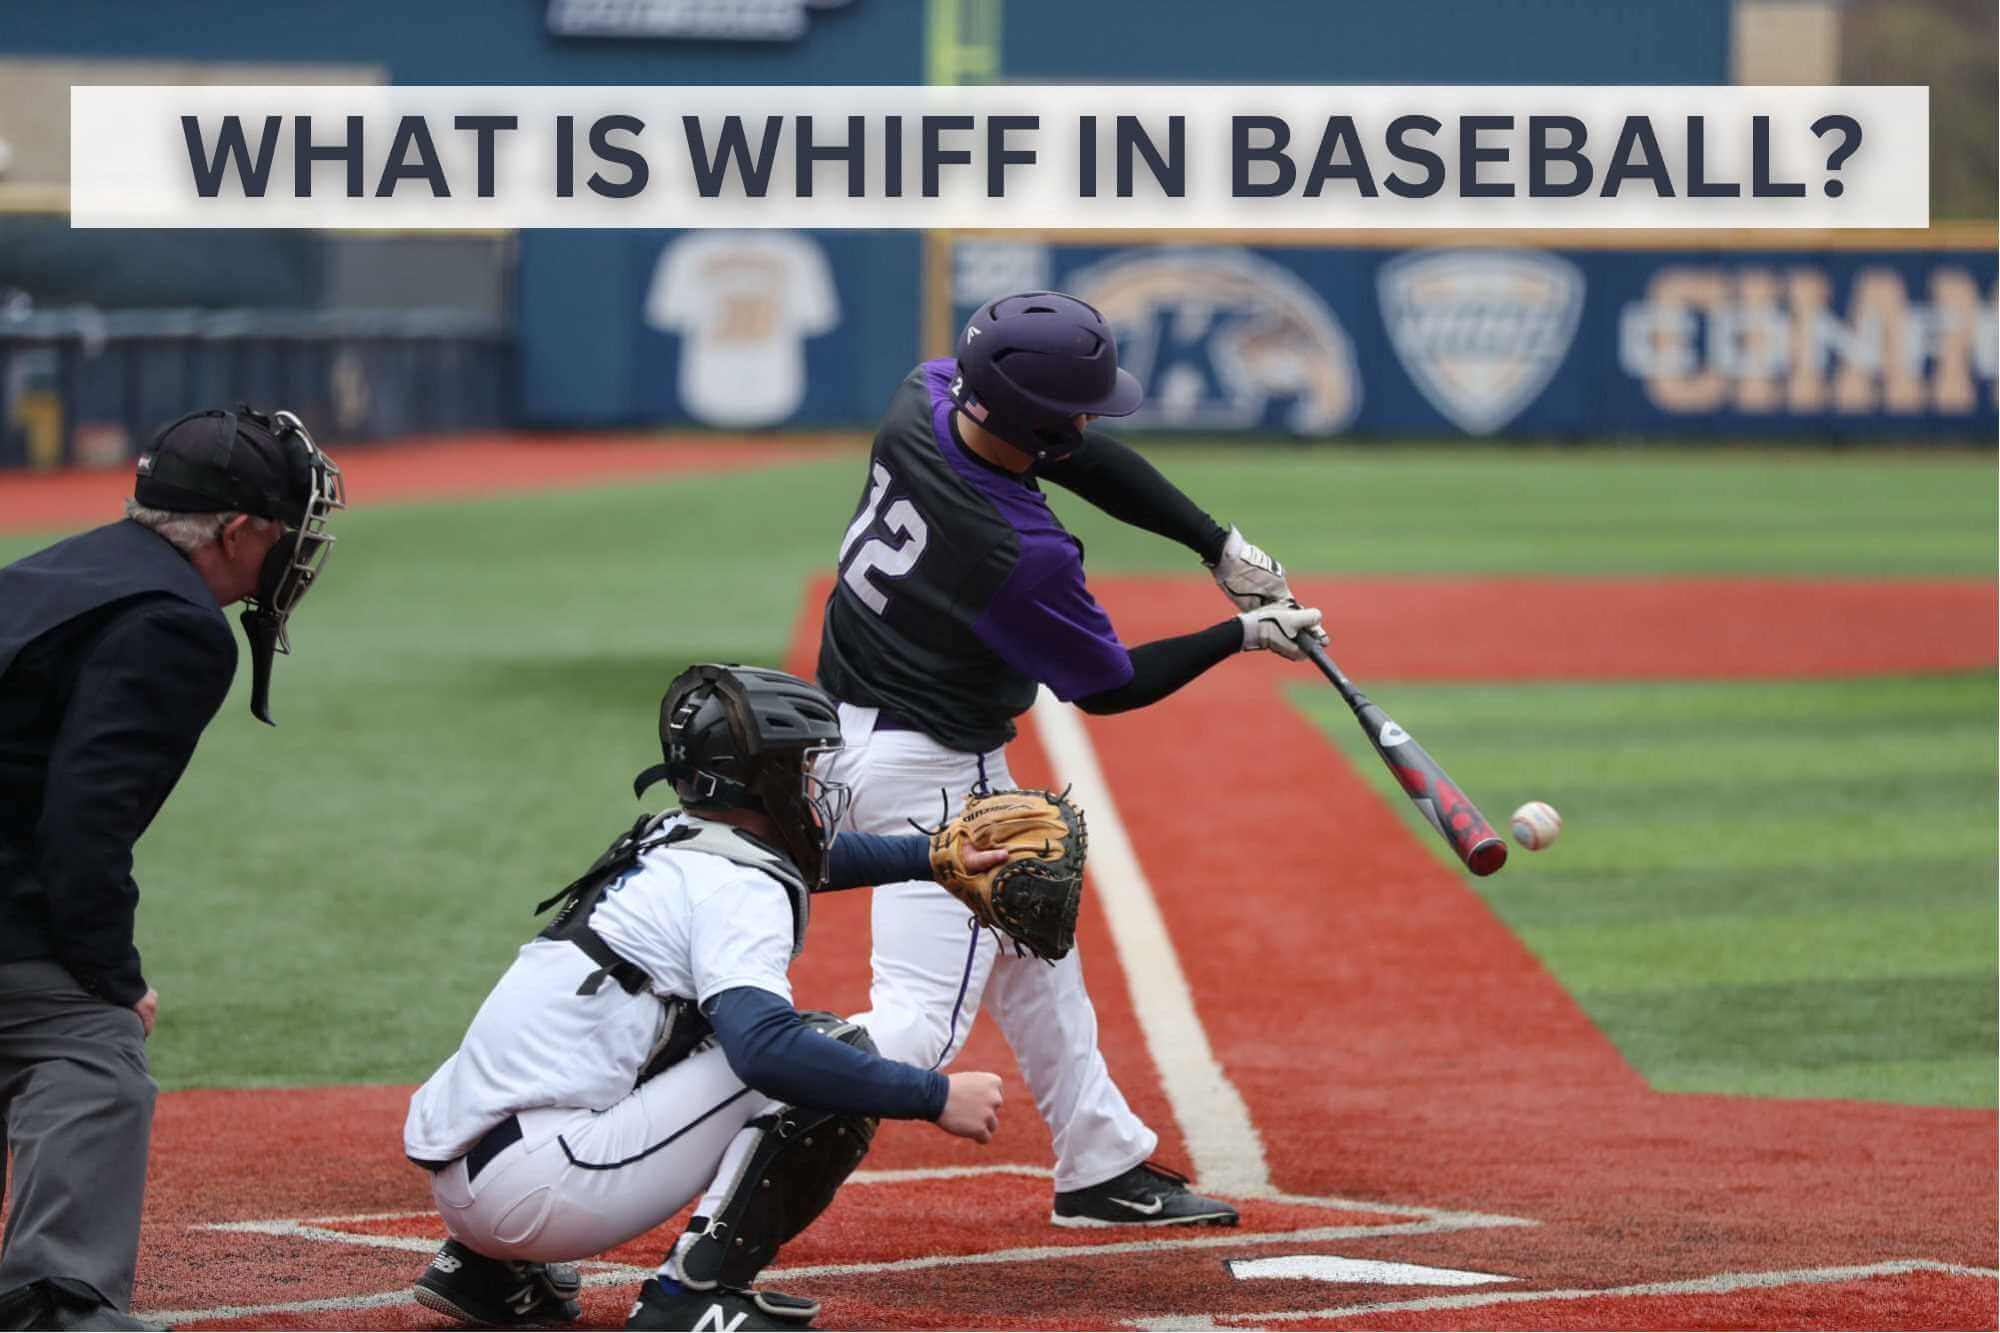 what is whiff in baseball